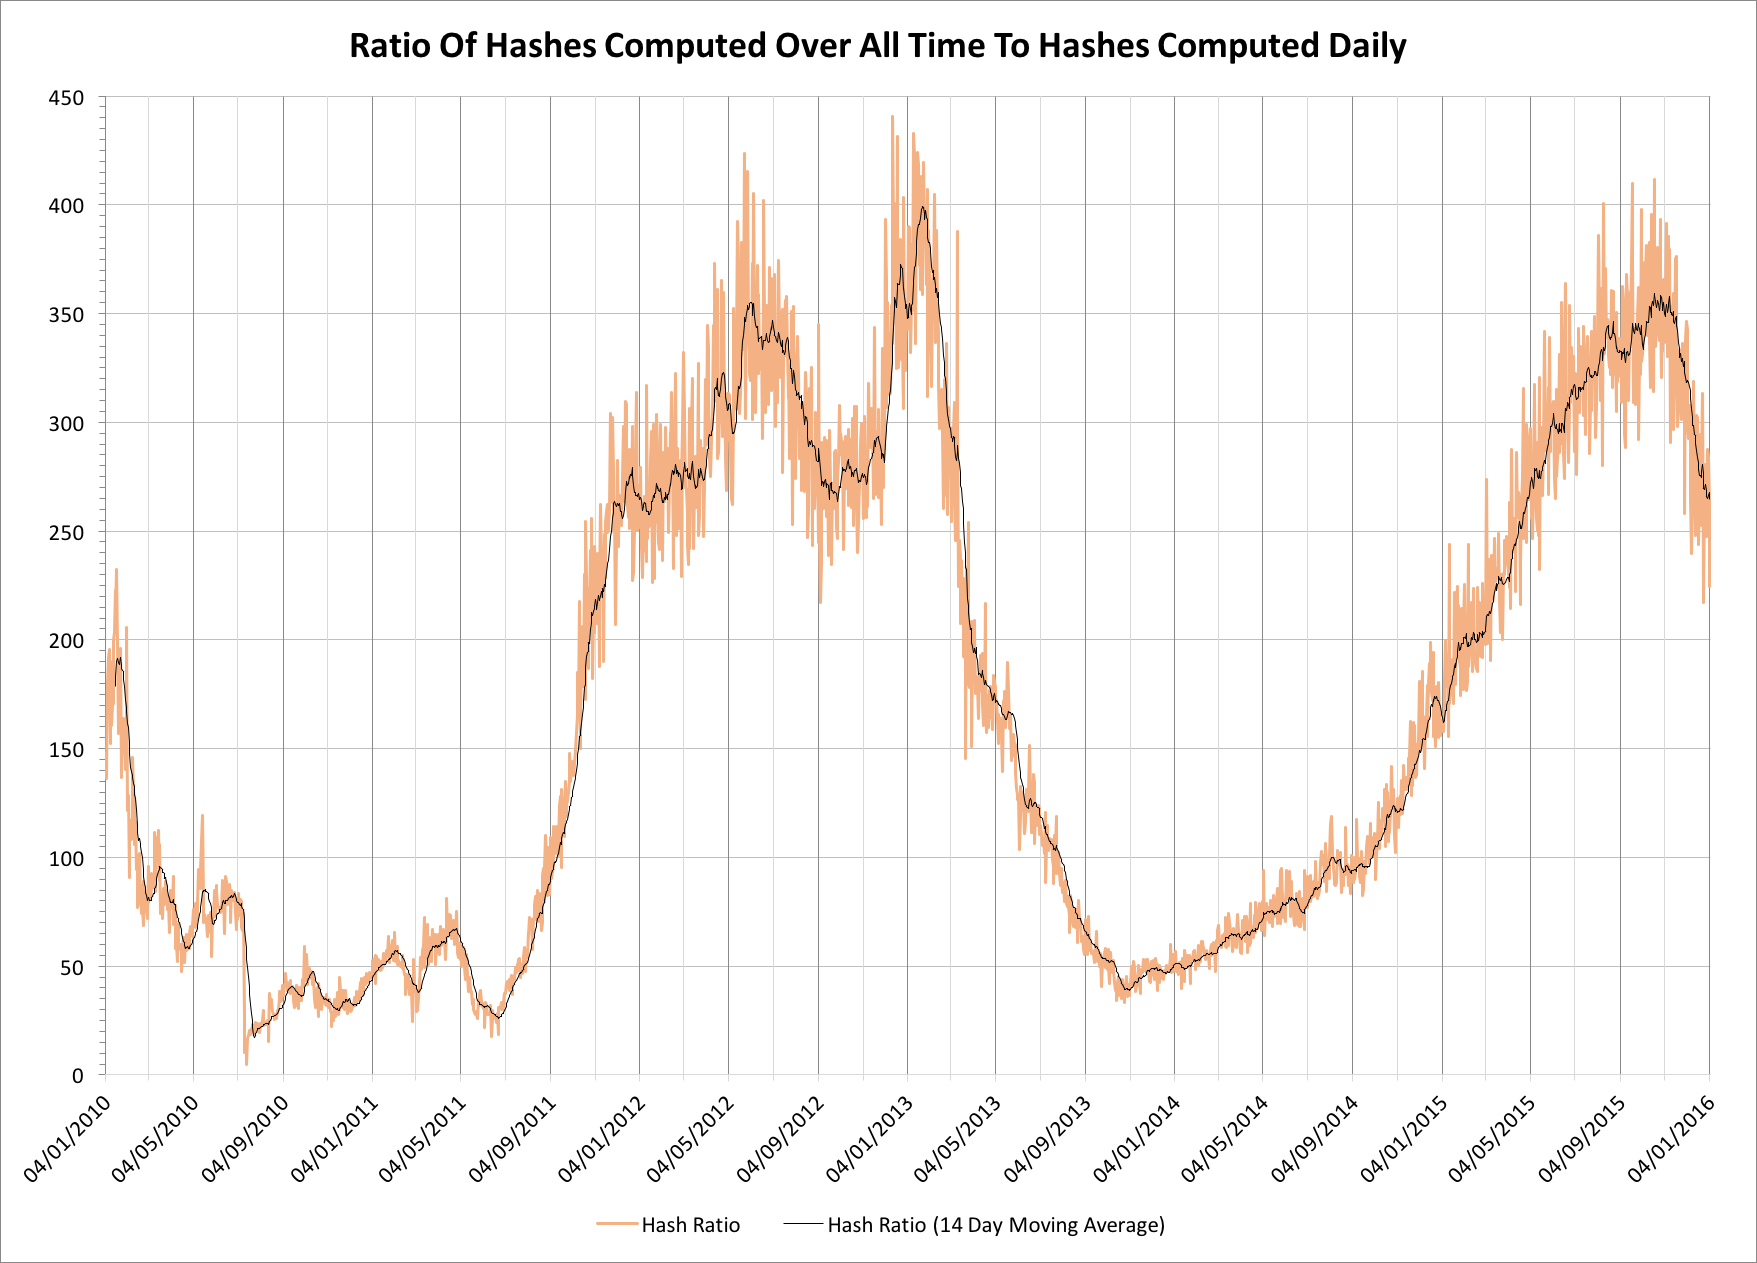 Ratio of total cumulative hashes to daily hashes